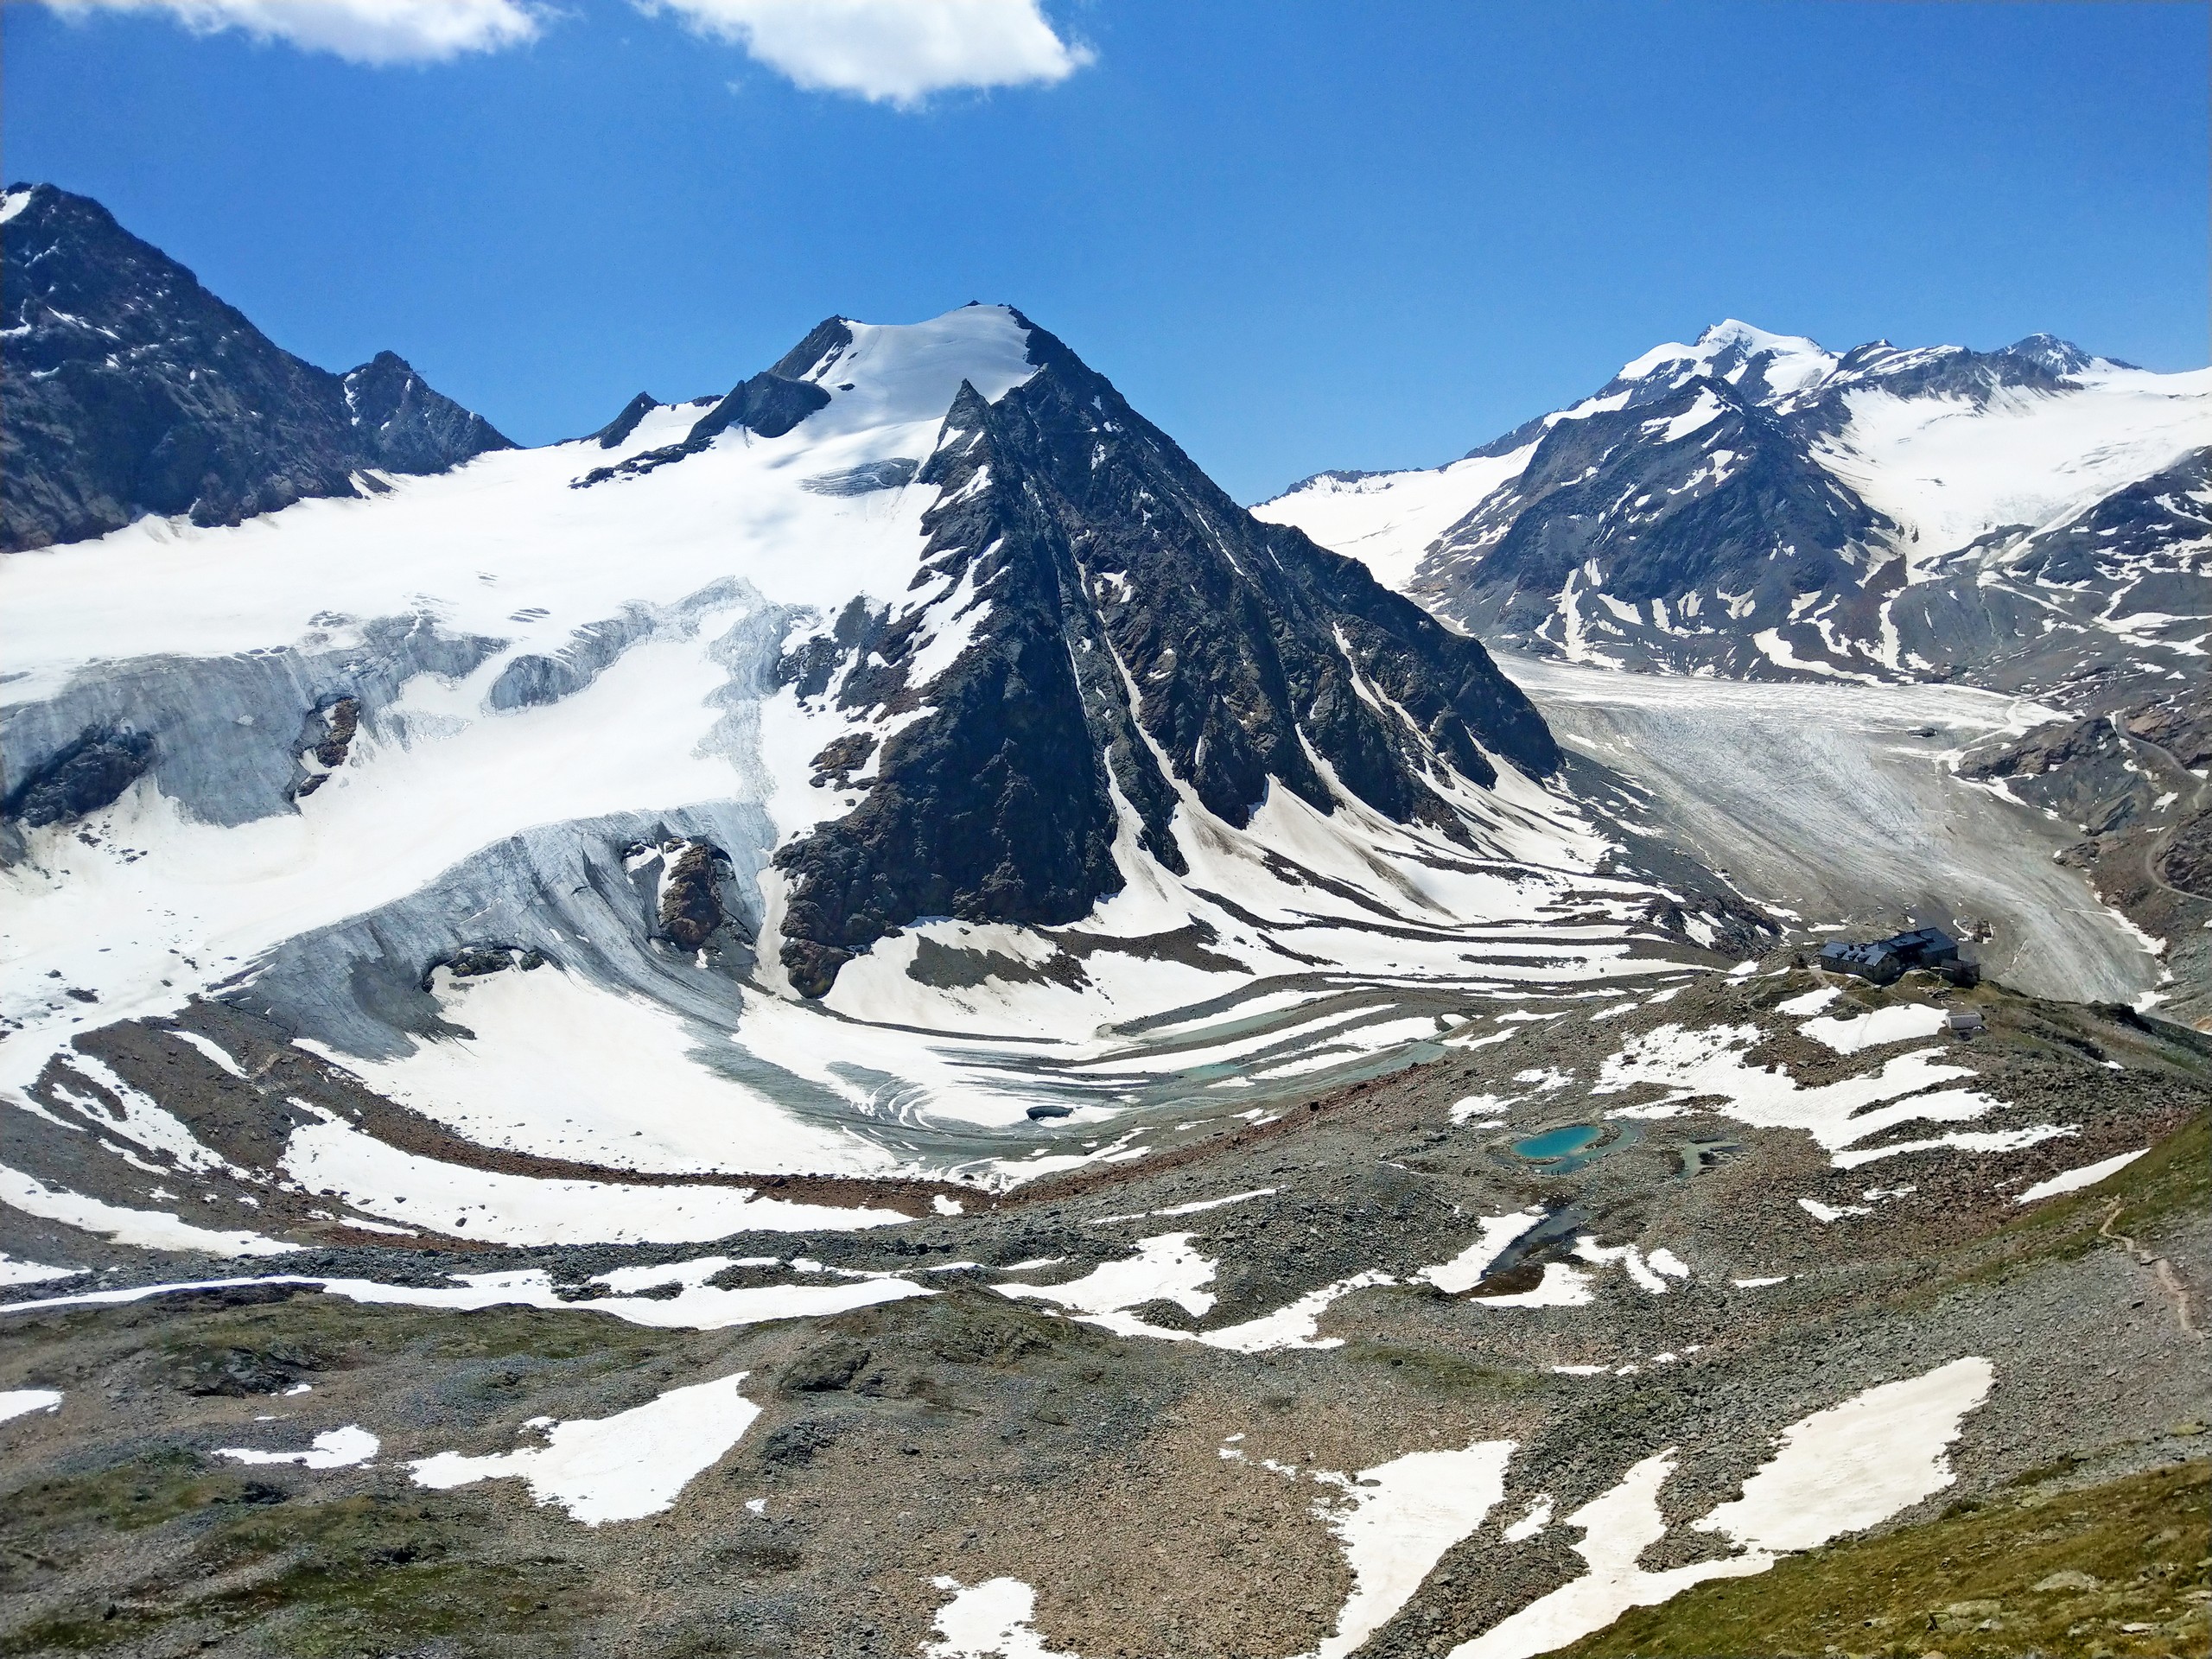 Stunning glaciers seen while hiking the E5 route